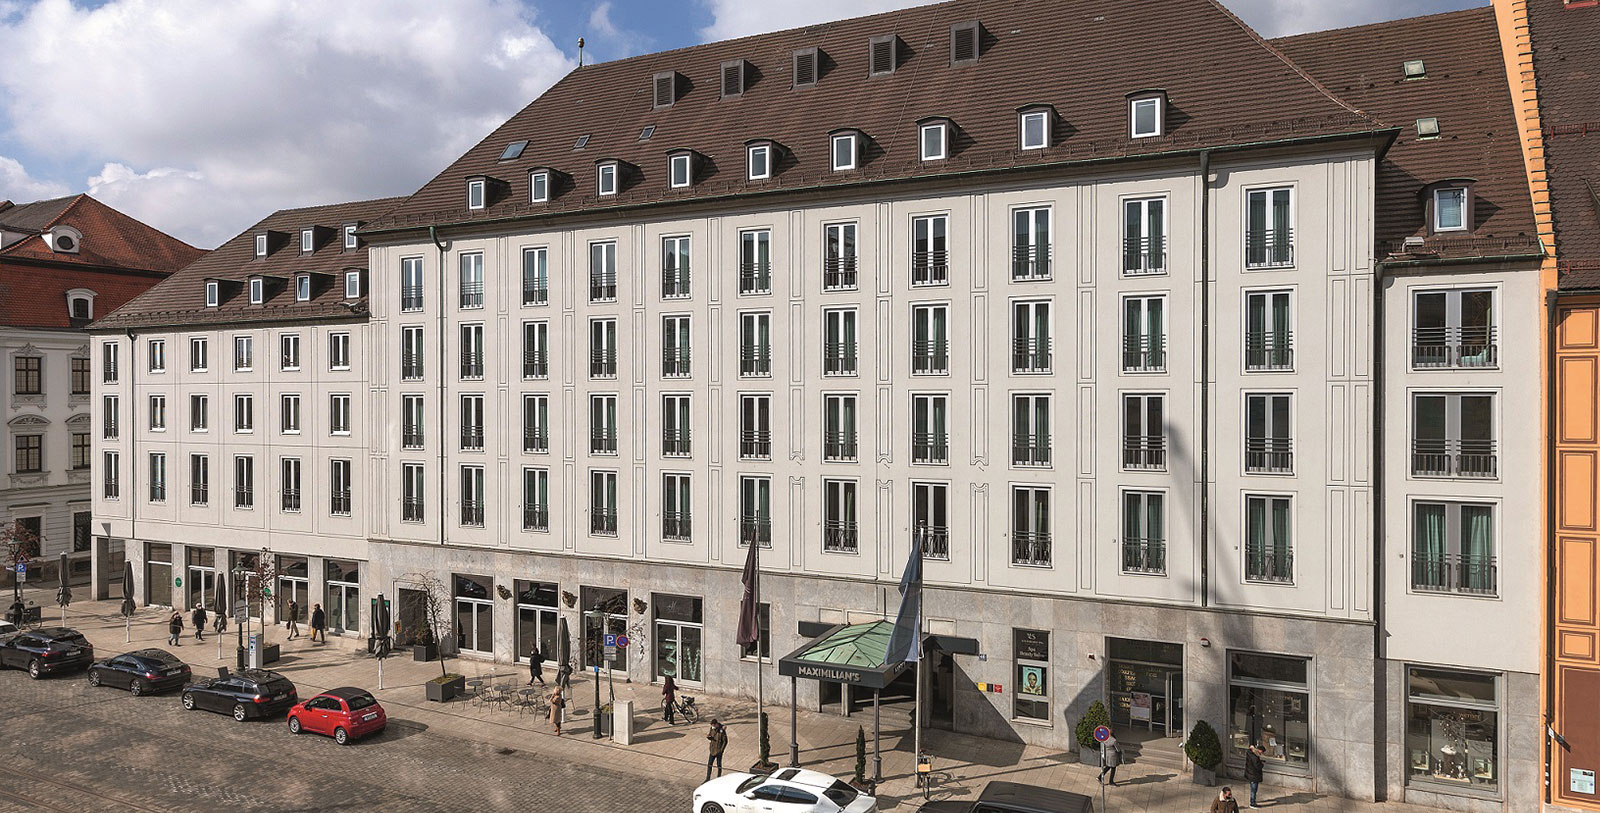 Image of Exterior Hotel Maximilian’s, 1722, Member of Historic Hotels Worldwide, in Augsburg, Germany, Overview